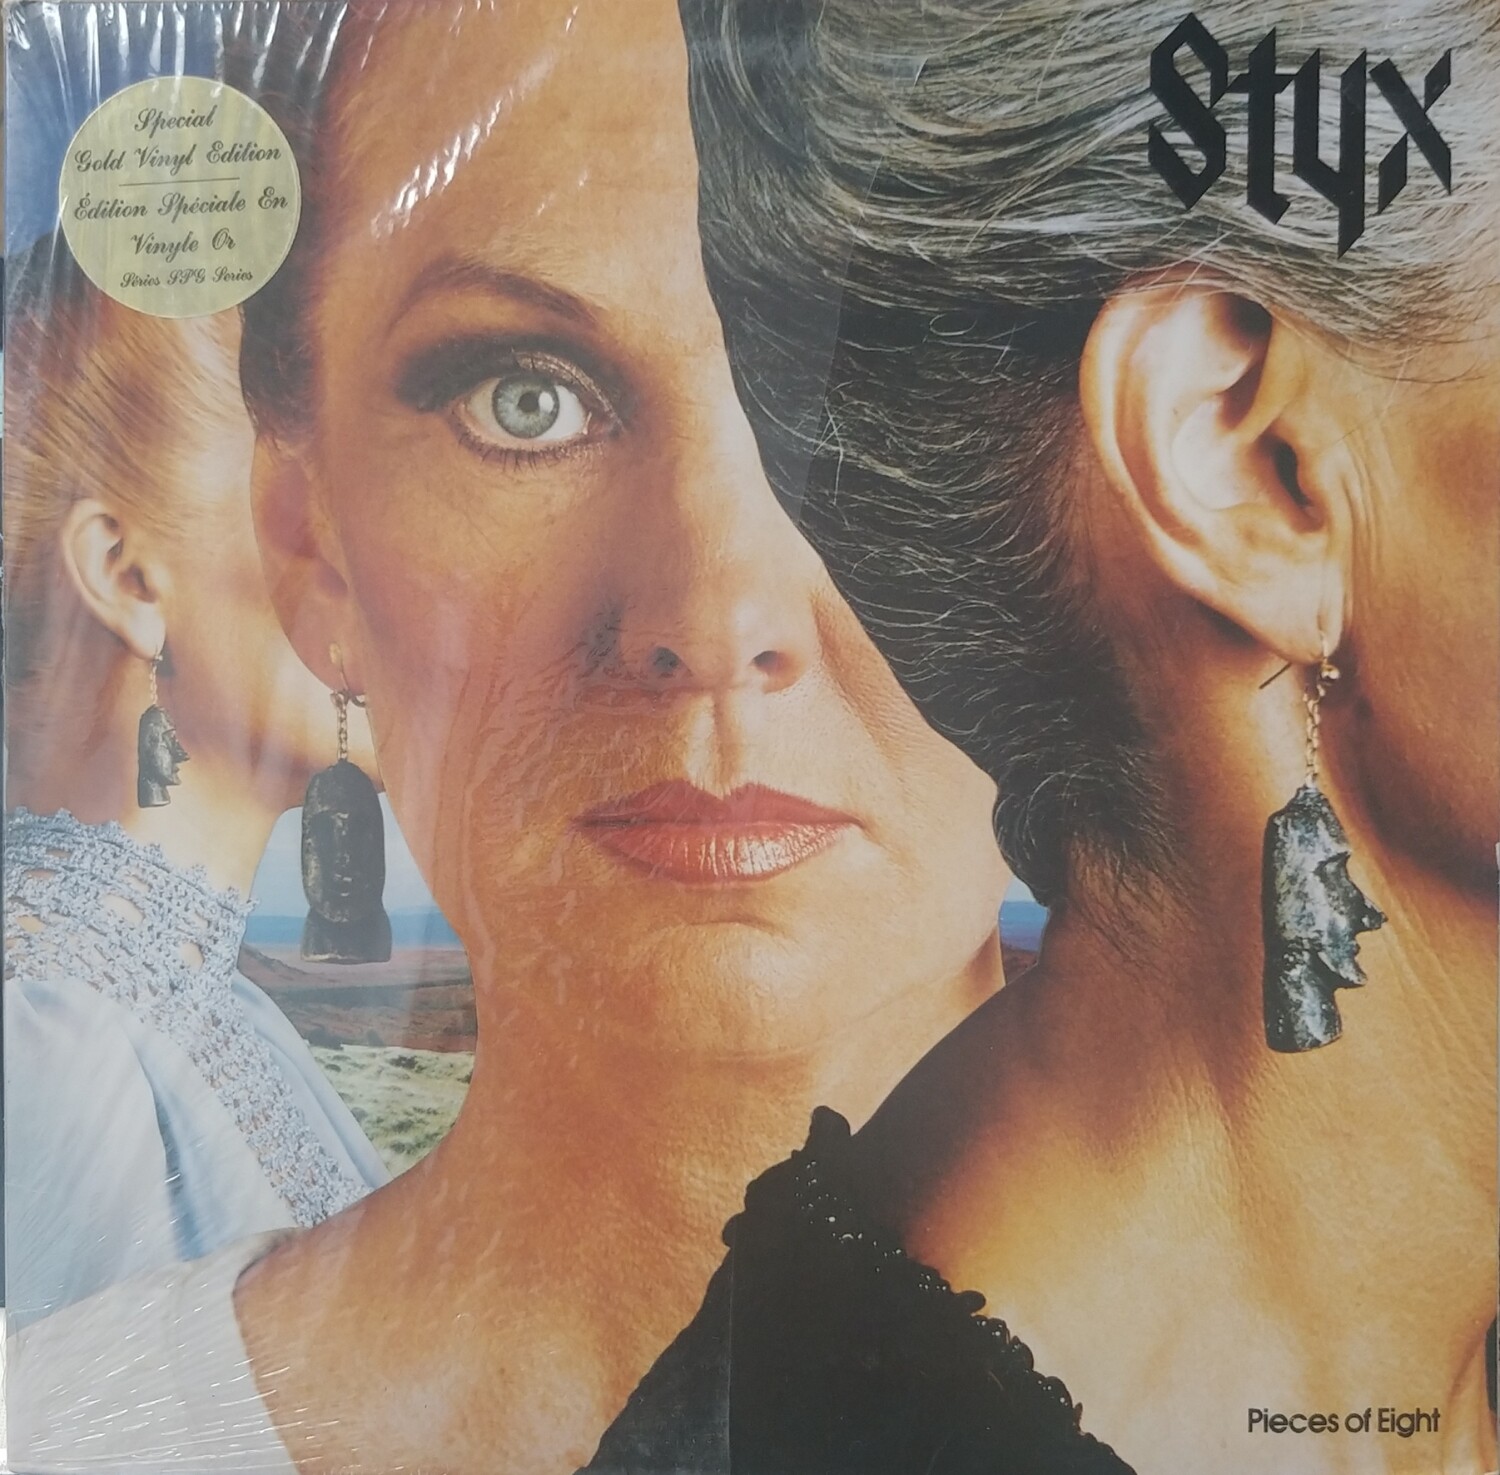 STYX - Pieces of eight (GOLD)